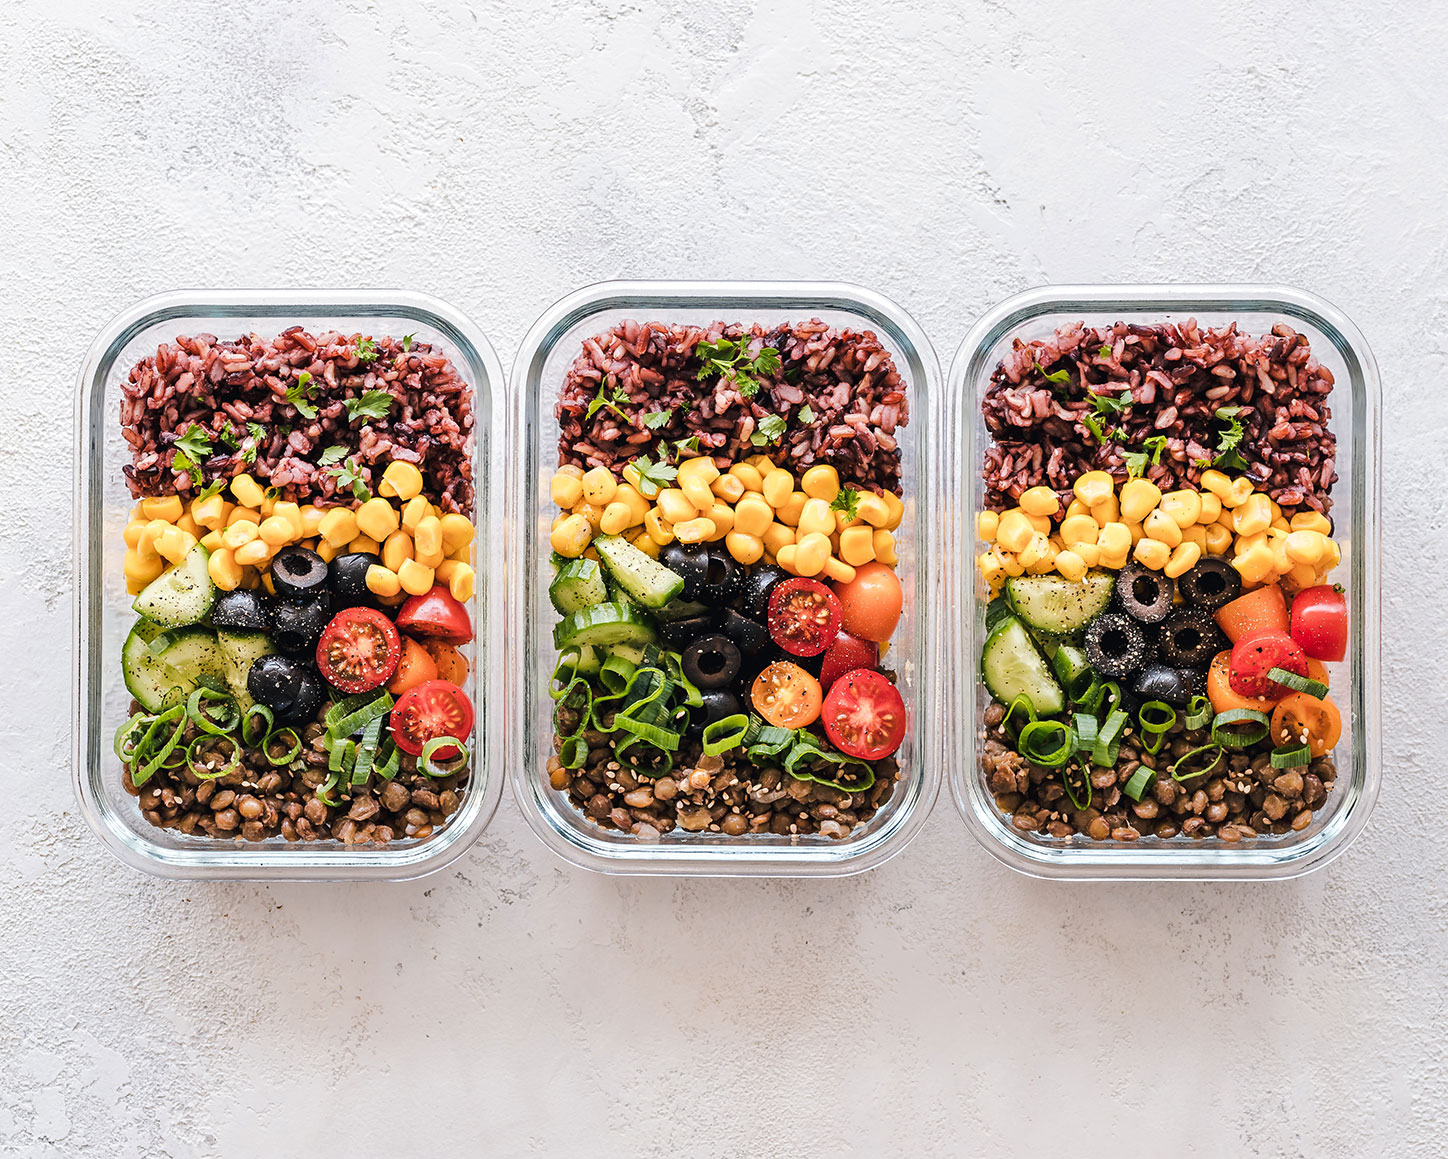 Budget-friendly Ways to Meal Prep